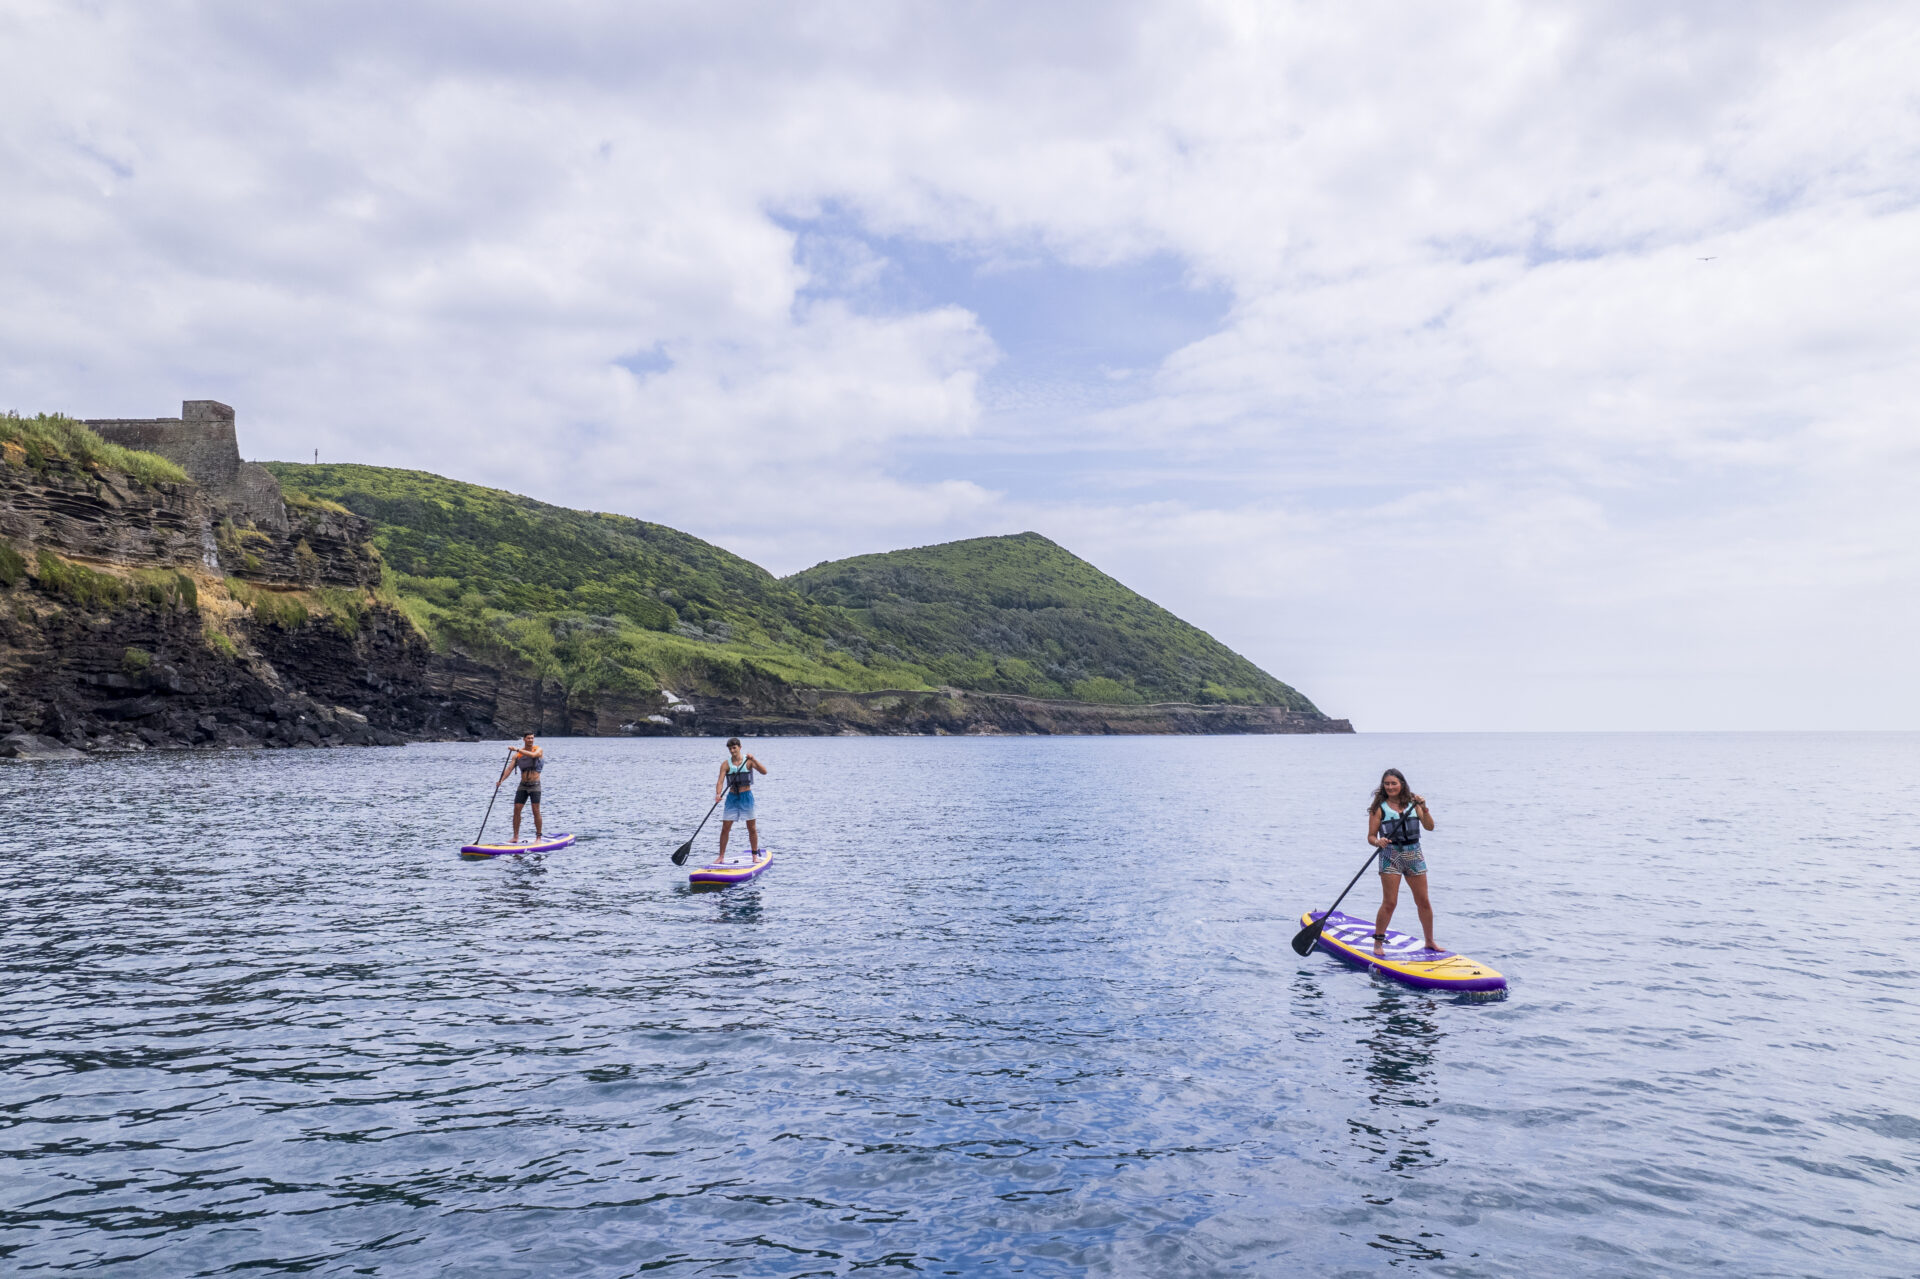 Discover the coast of the island by kayak, stand up or even venture out sometimes on foot and sometimes swimming through the coasteering activity.